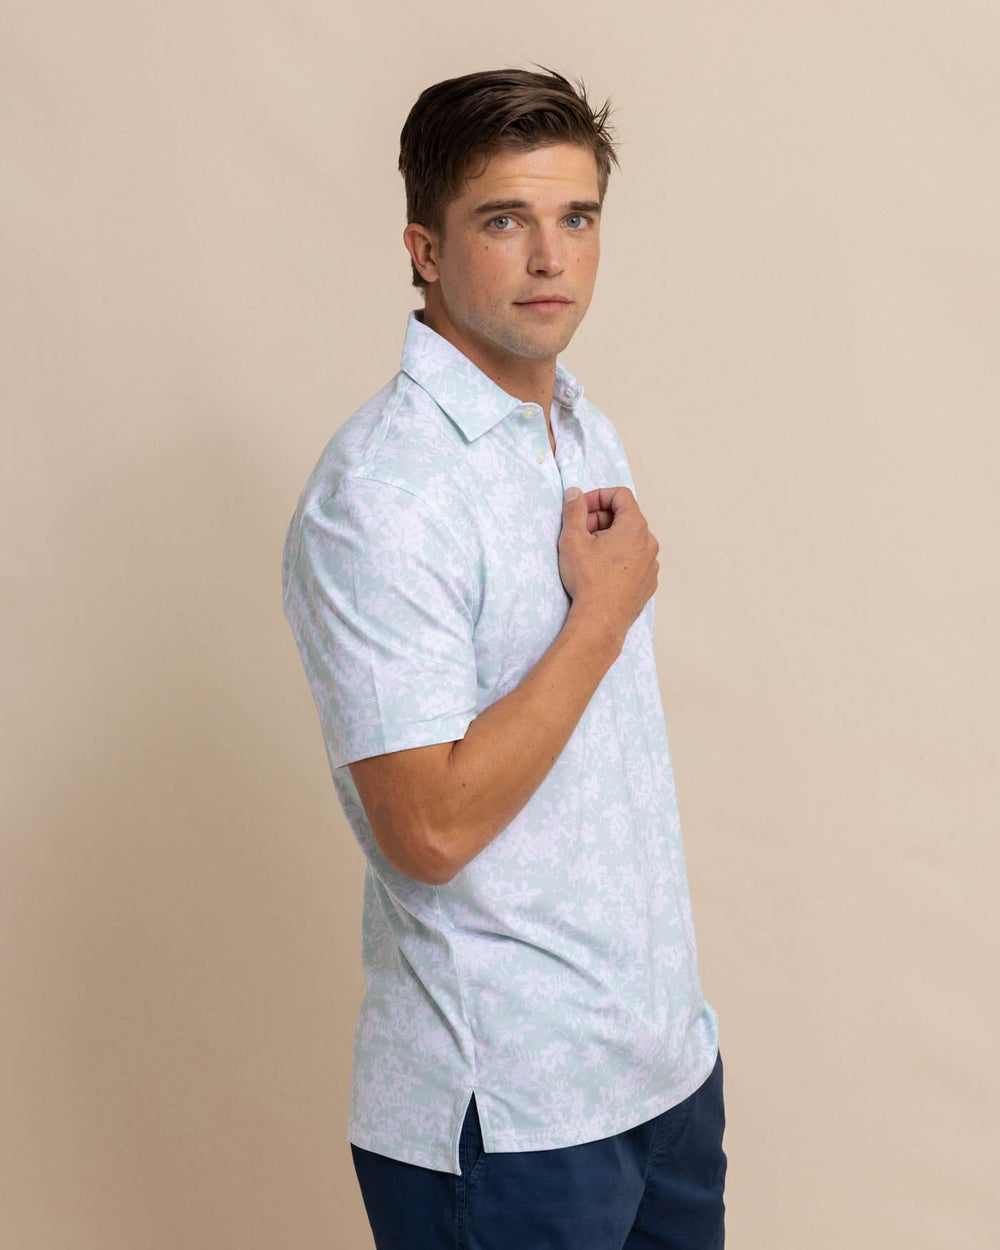 The front view of the Southern Tide Driver Island Blooms Printed Polo by Southern Tide - Surf Spray Sage